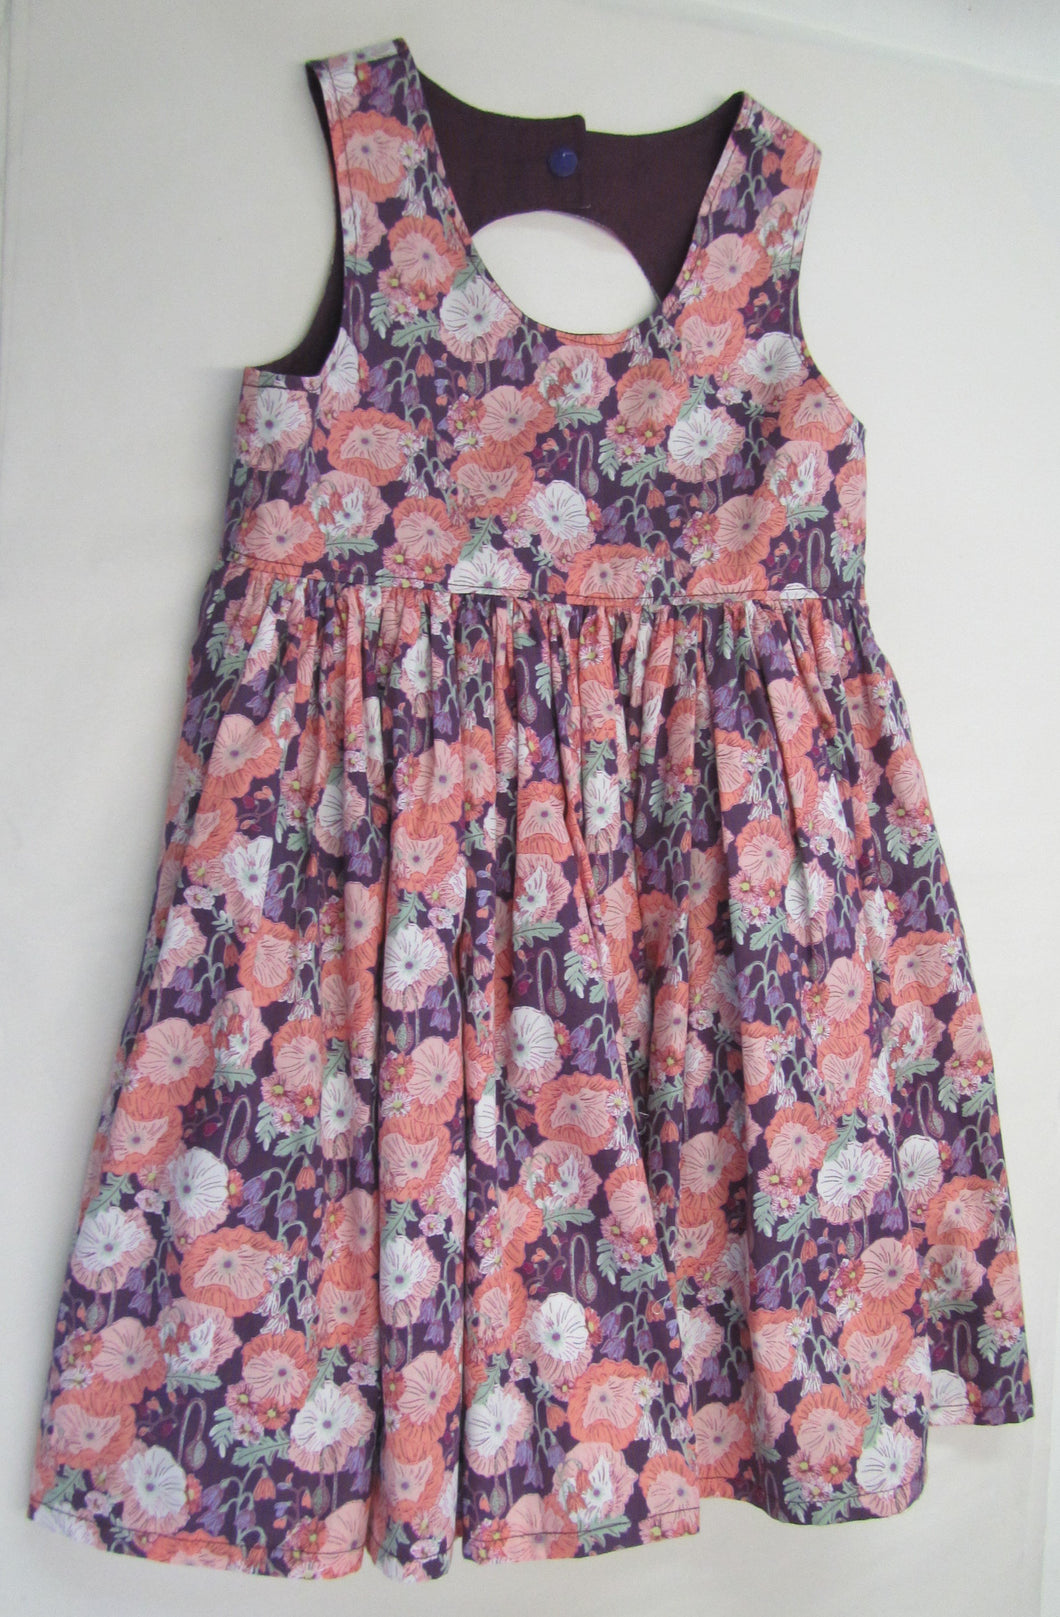 Hand crafted peach and purple floral dress fully lined 5 years